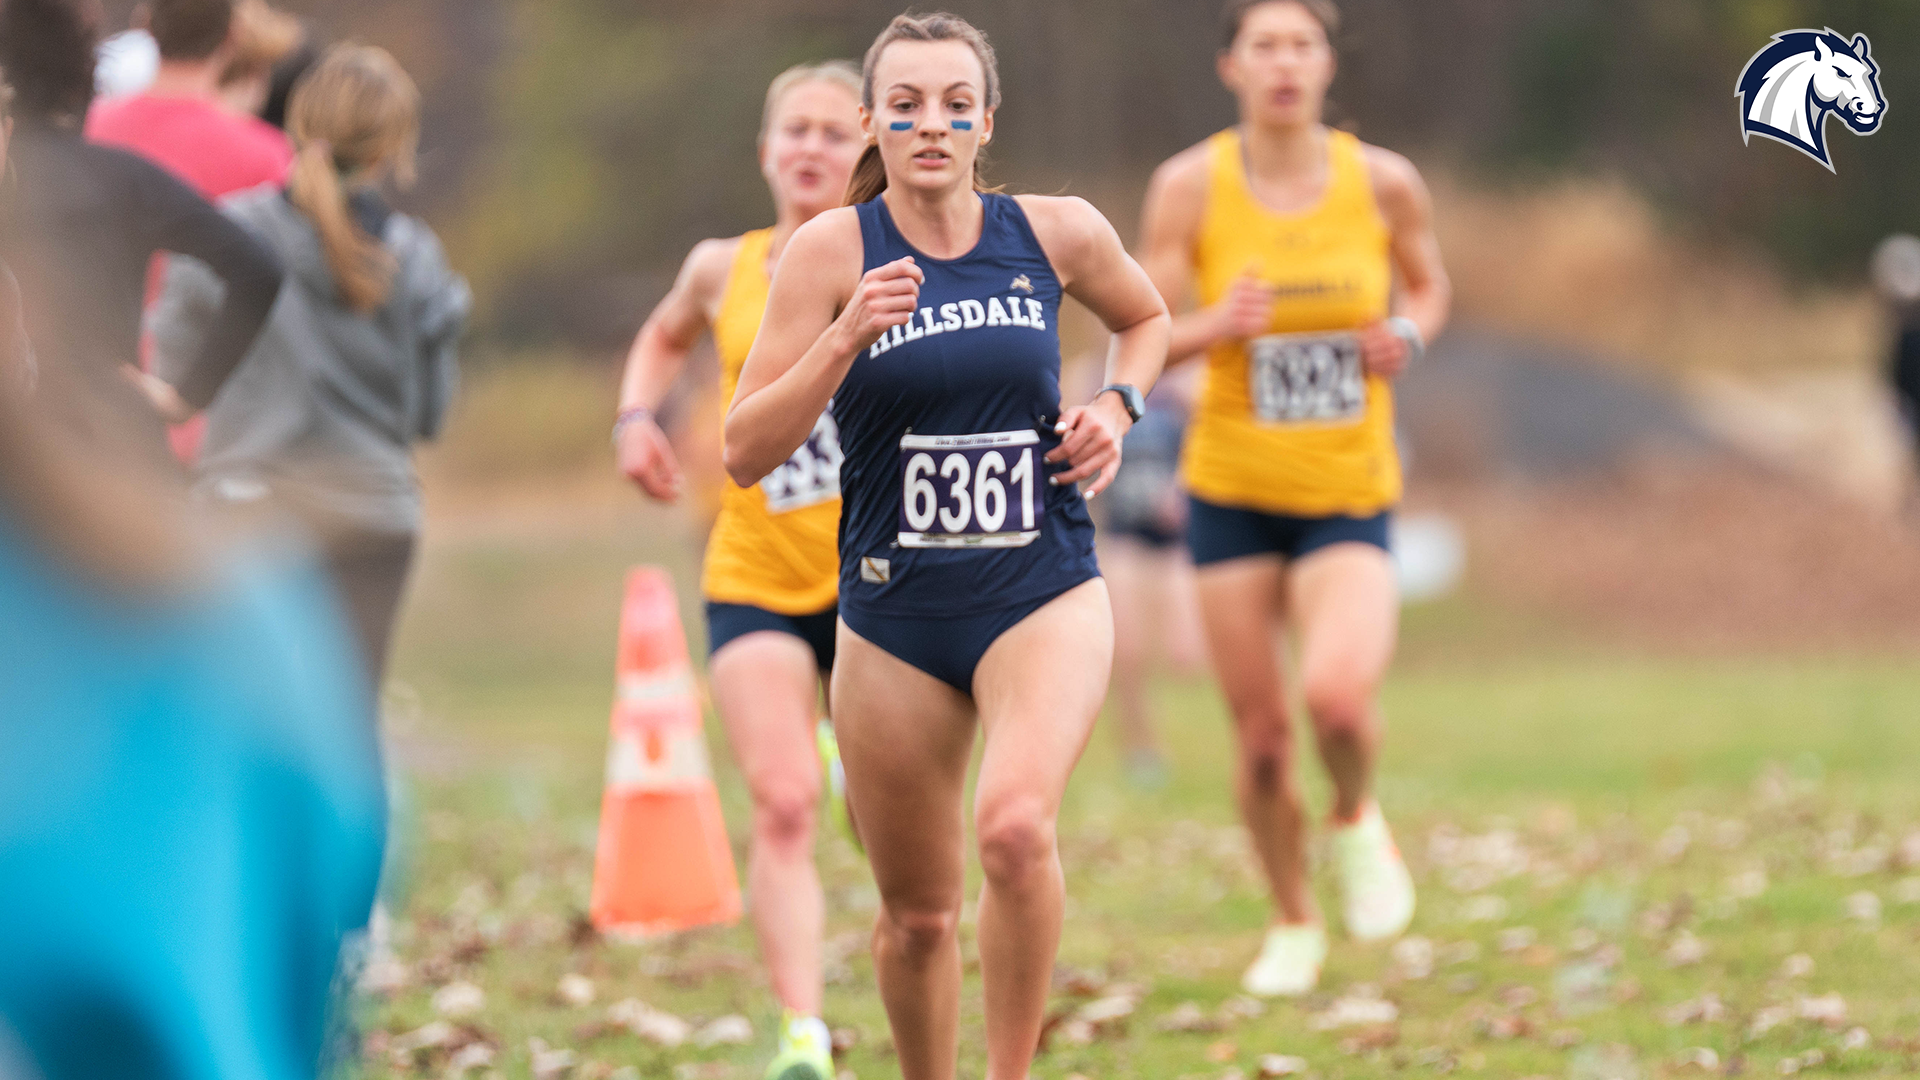 Chargers' Liz Wamsley becomes Hillsdale's first women's cross country All-American since 2018